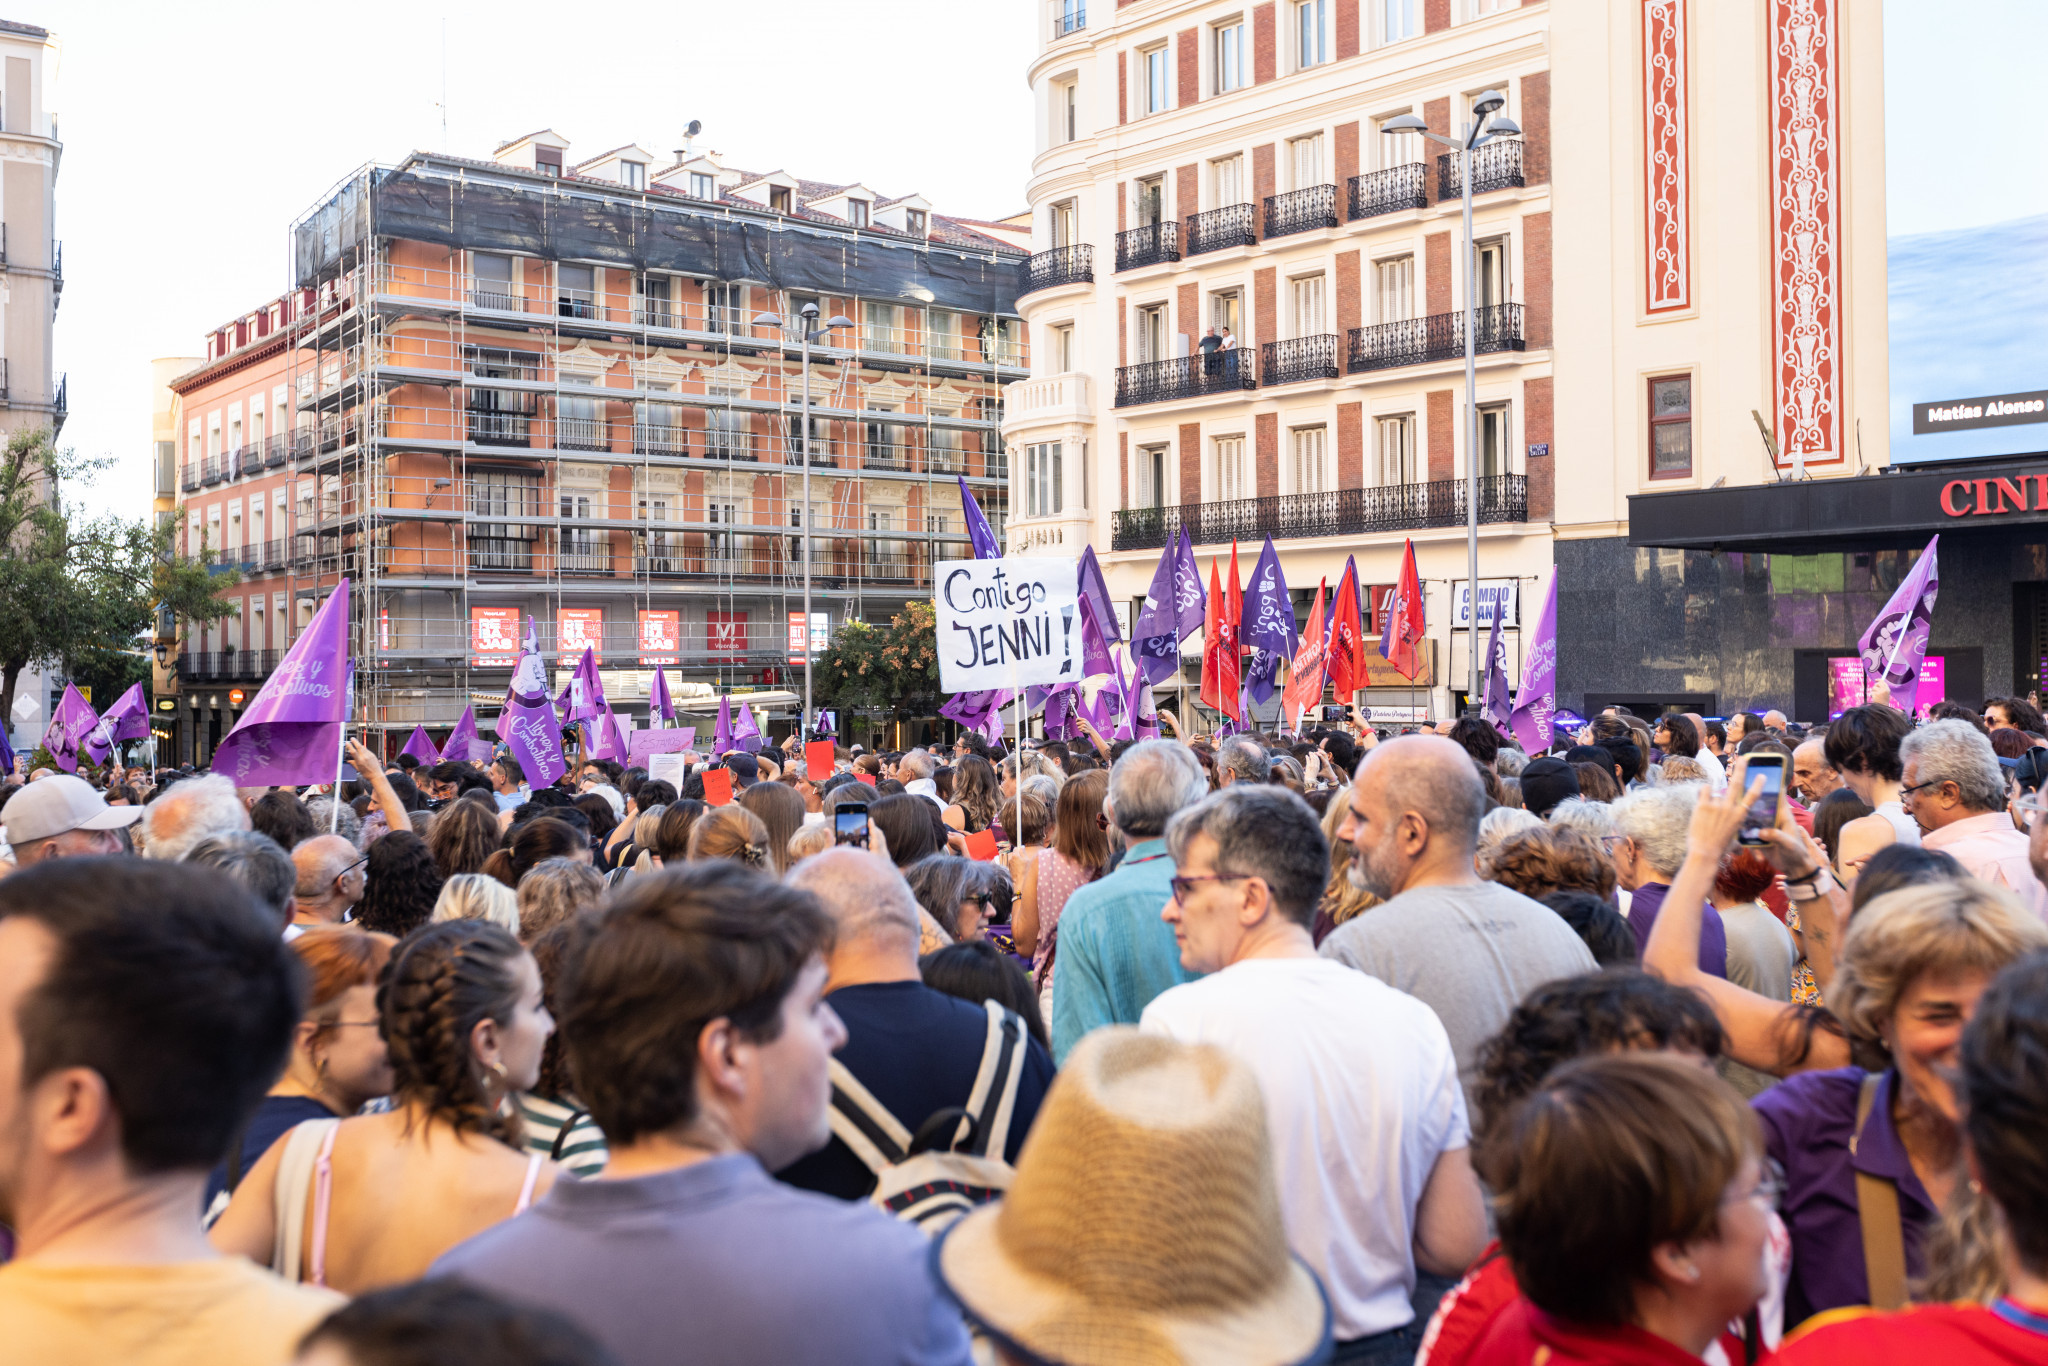 Hundreds attended a protest in Madrid yesterday expressing support for Jennifer Hermoso and demanding Luis Rubiales' resignation ©Getty Images